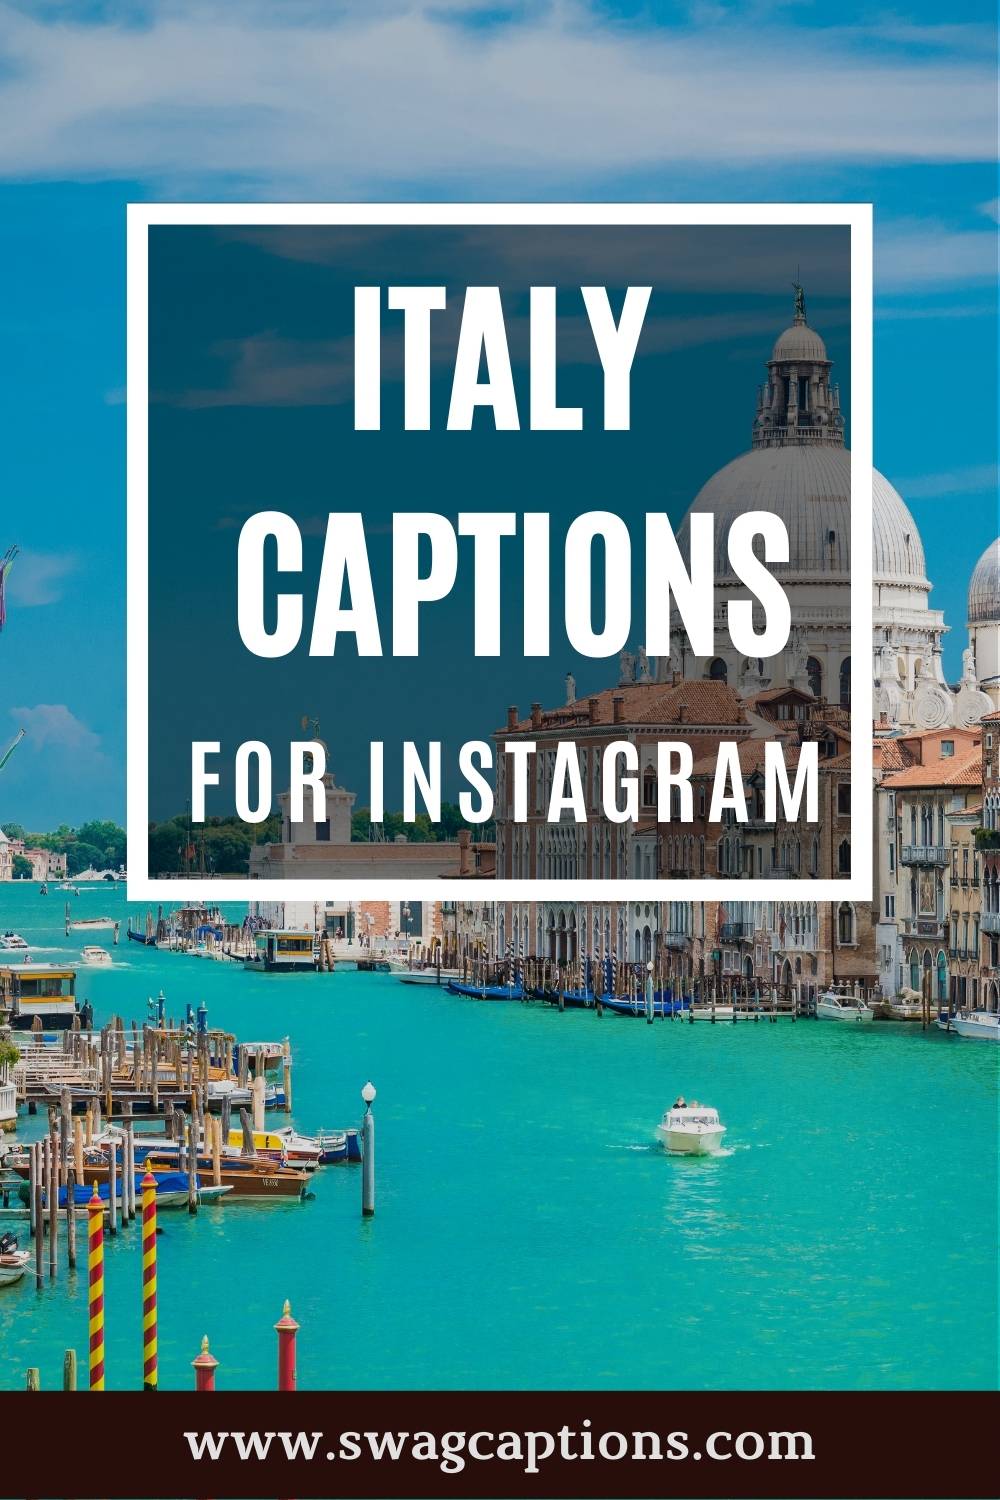 Italy Captions For Instagram